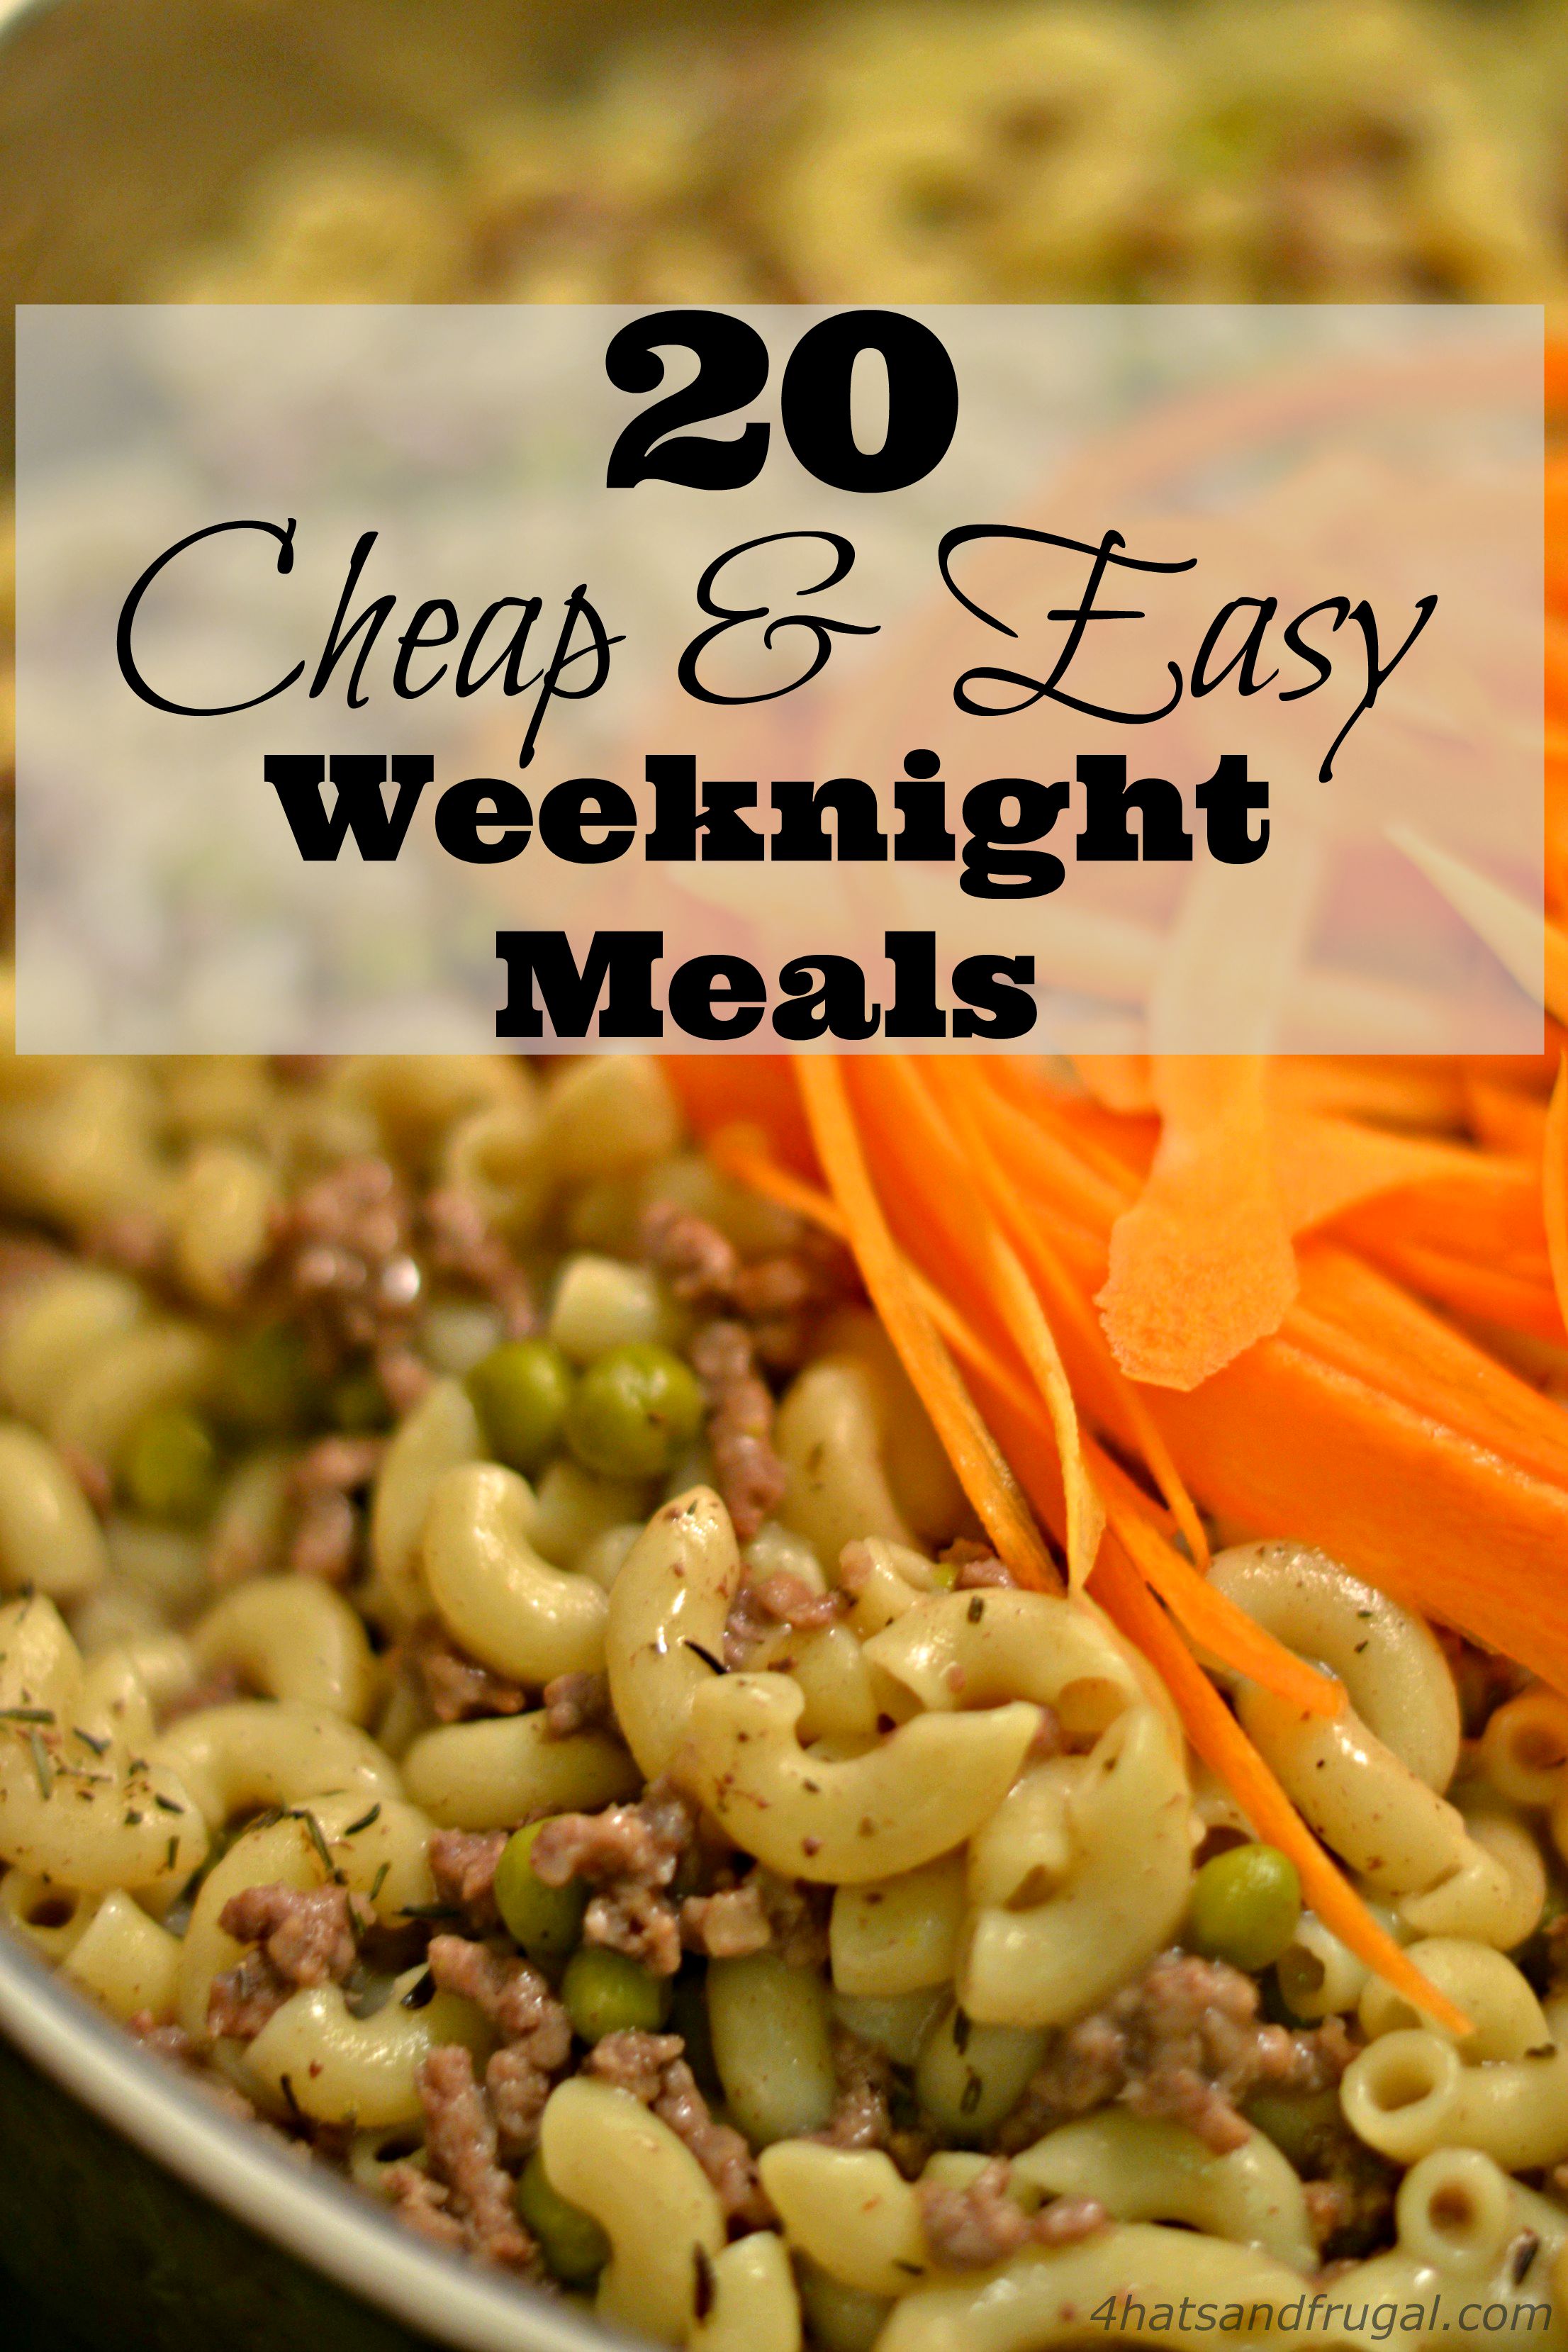 20 Cheap & Easy Weeknight Meals - 4 Hats and Frugal